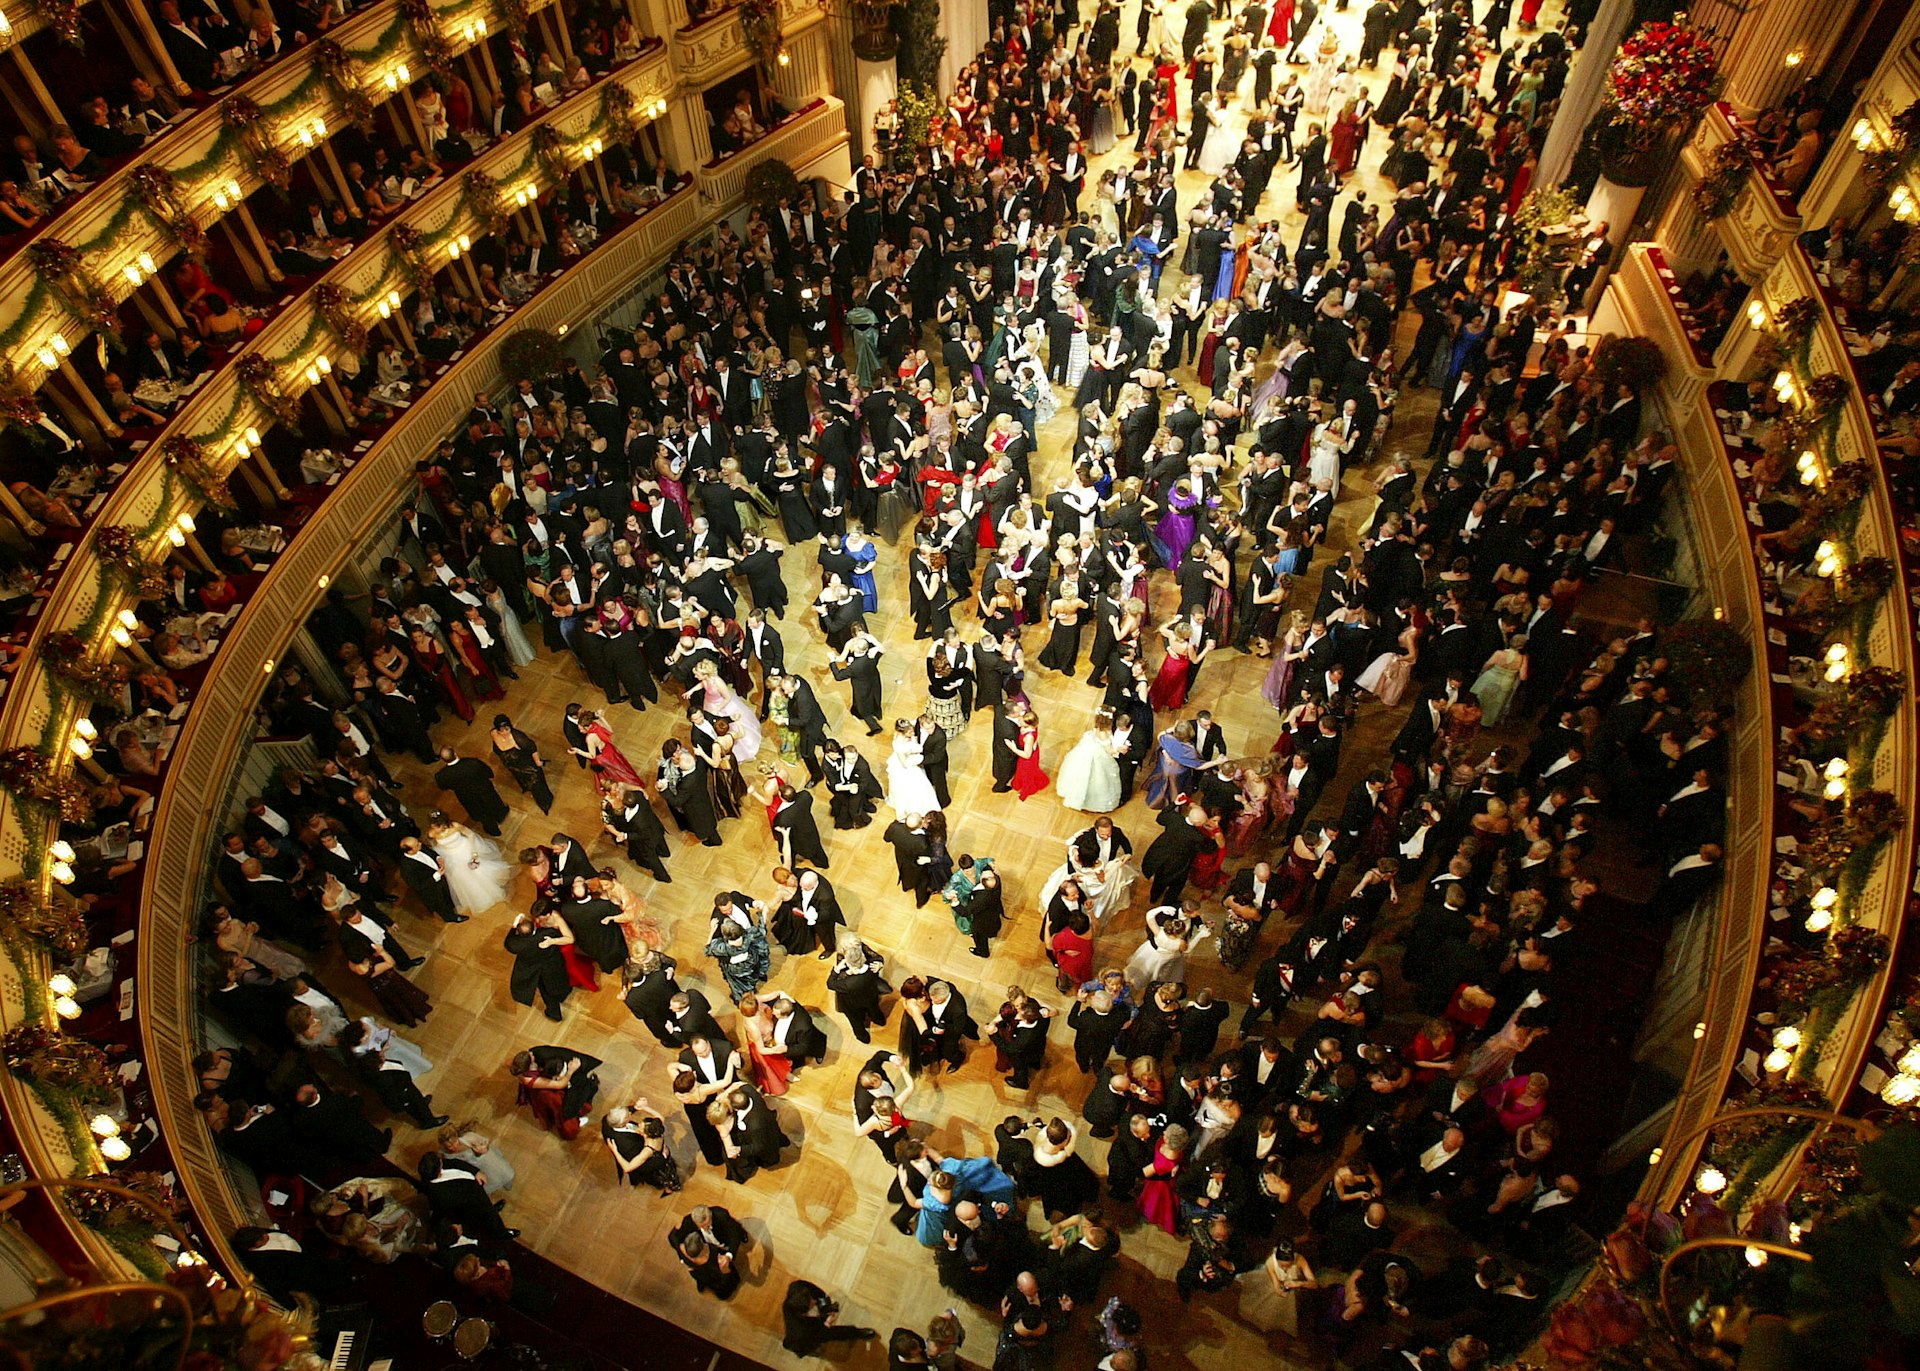 Guests dance a waltz at the Vienna Opera Ball © Sean Gallup / Getty Images